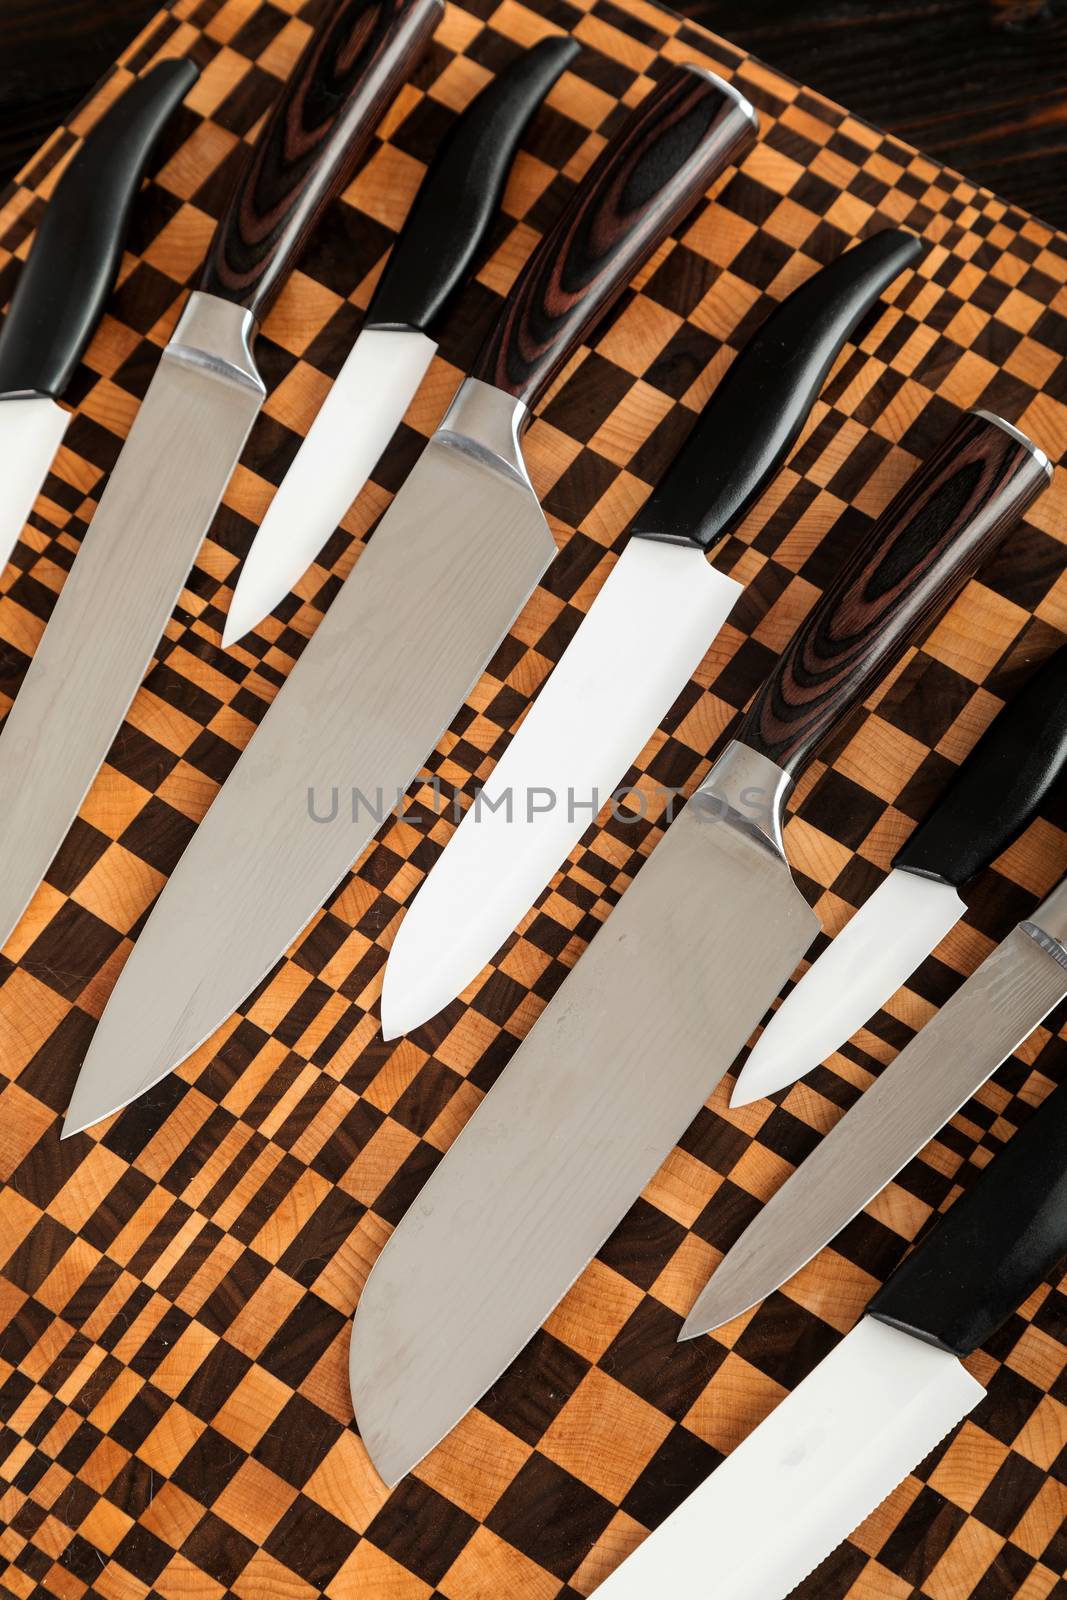 A set of high quality kitchen knives on a wooden cutting board